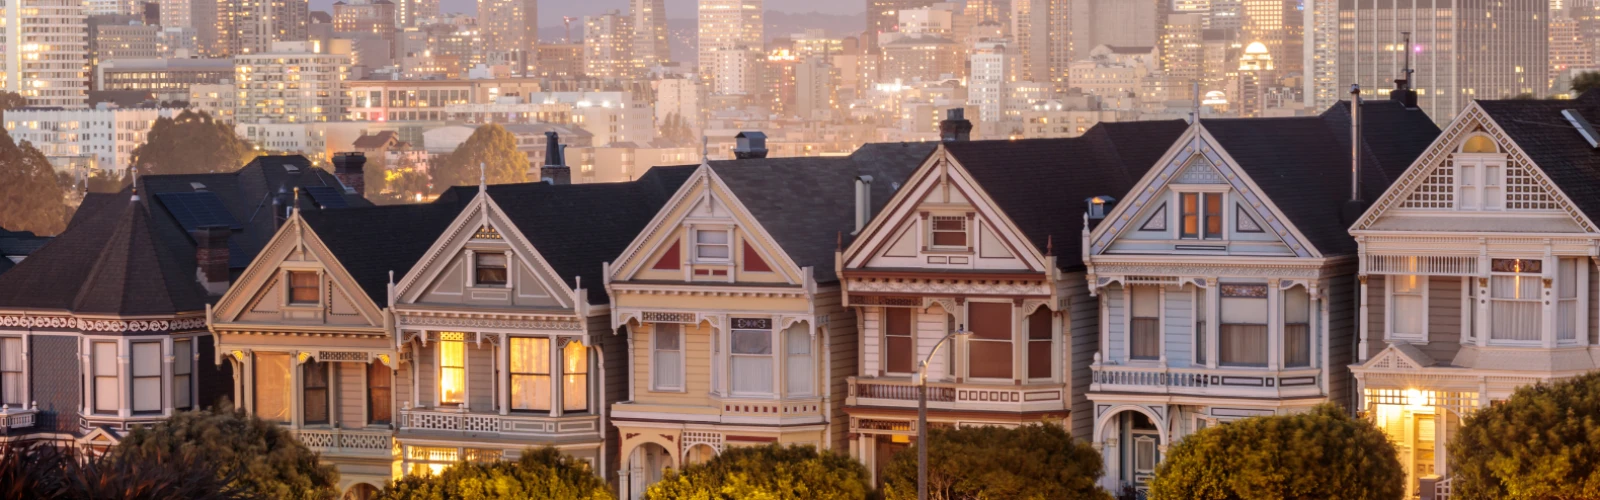 Things to See in San Francisco